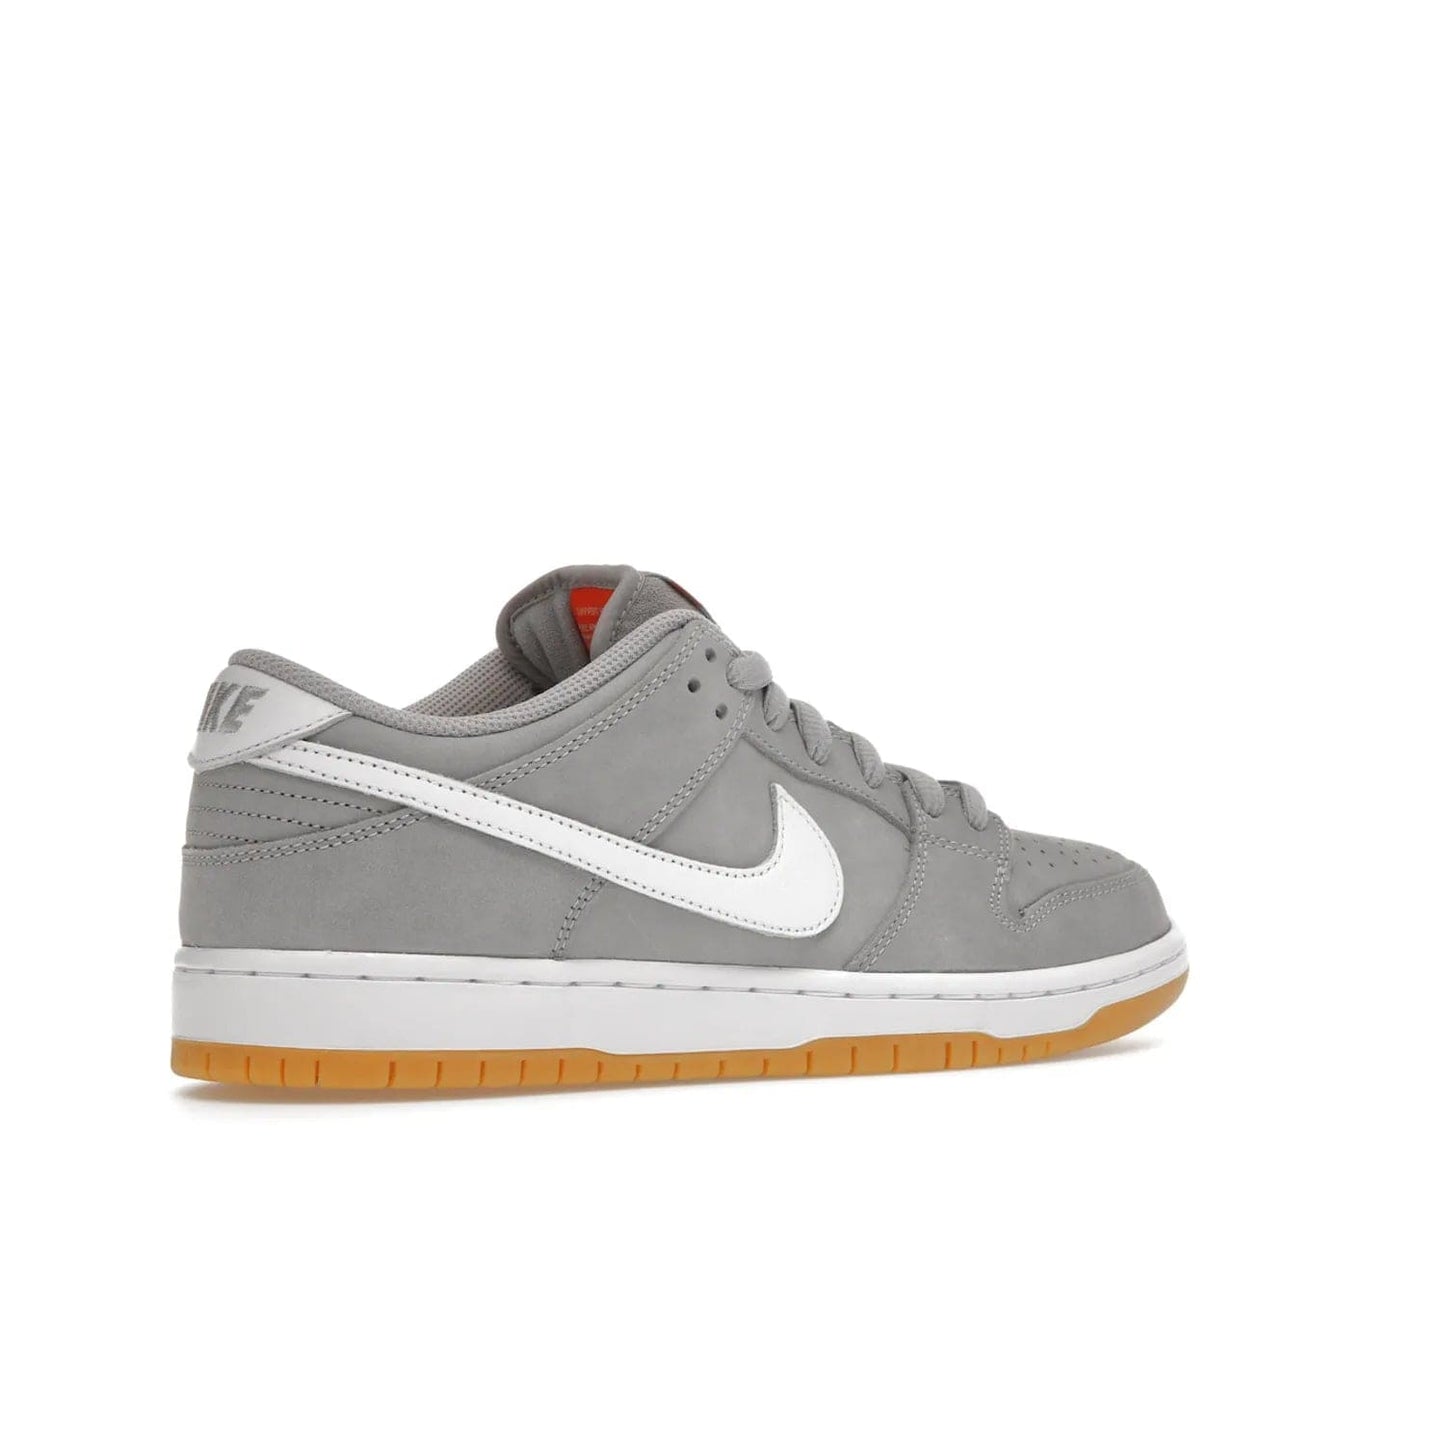 Nike SB Dunk Low Pro ISO Orange Label Wolf Grey Gum - Image 34 - Only at www.BallersClubKickz.com - Introducing Nike's SB Dunk Low Pro ISO Orange Label Wolf Grey Gum - a stylish shoe with a premium Wolf Grey upper, white leather Nike Swoosh, and an eye-catching gum outsole. With special Nike branding and packaging, this shoe adds a unique fashion statement. Out Feb. 24, 2023.